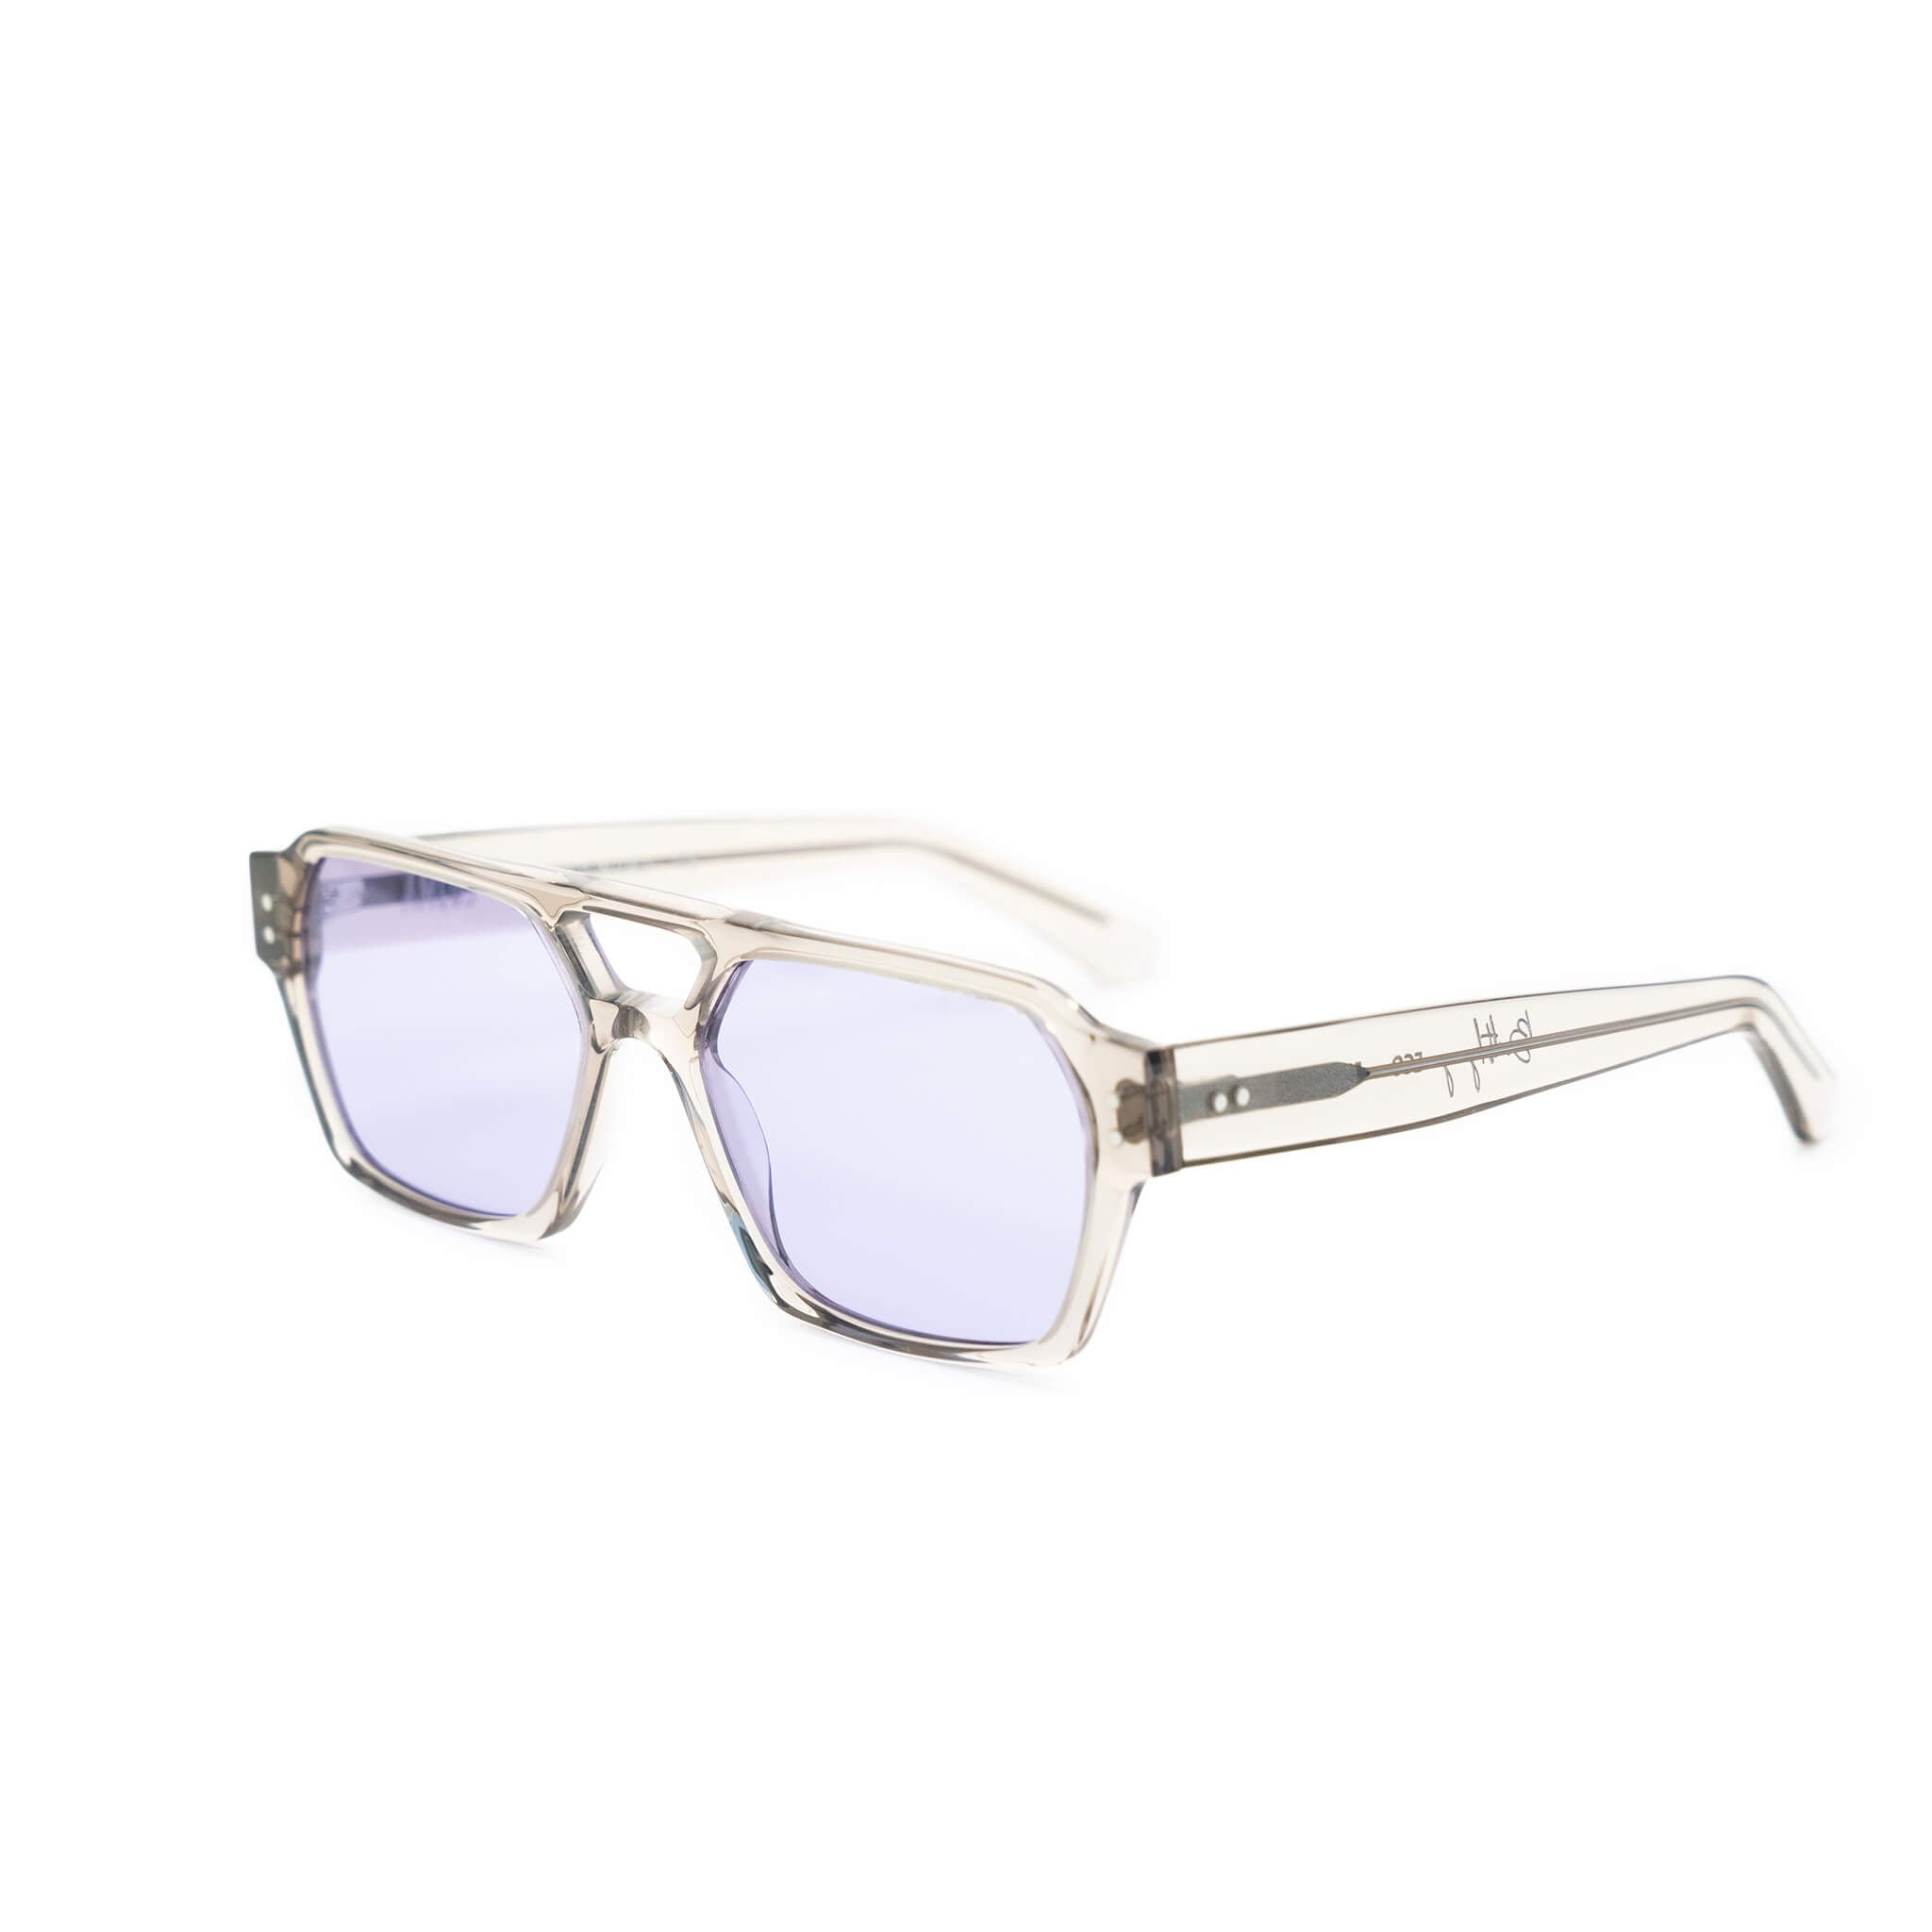 Ego sunglasses transparent grey and light purple from Ameos side angle